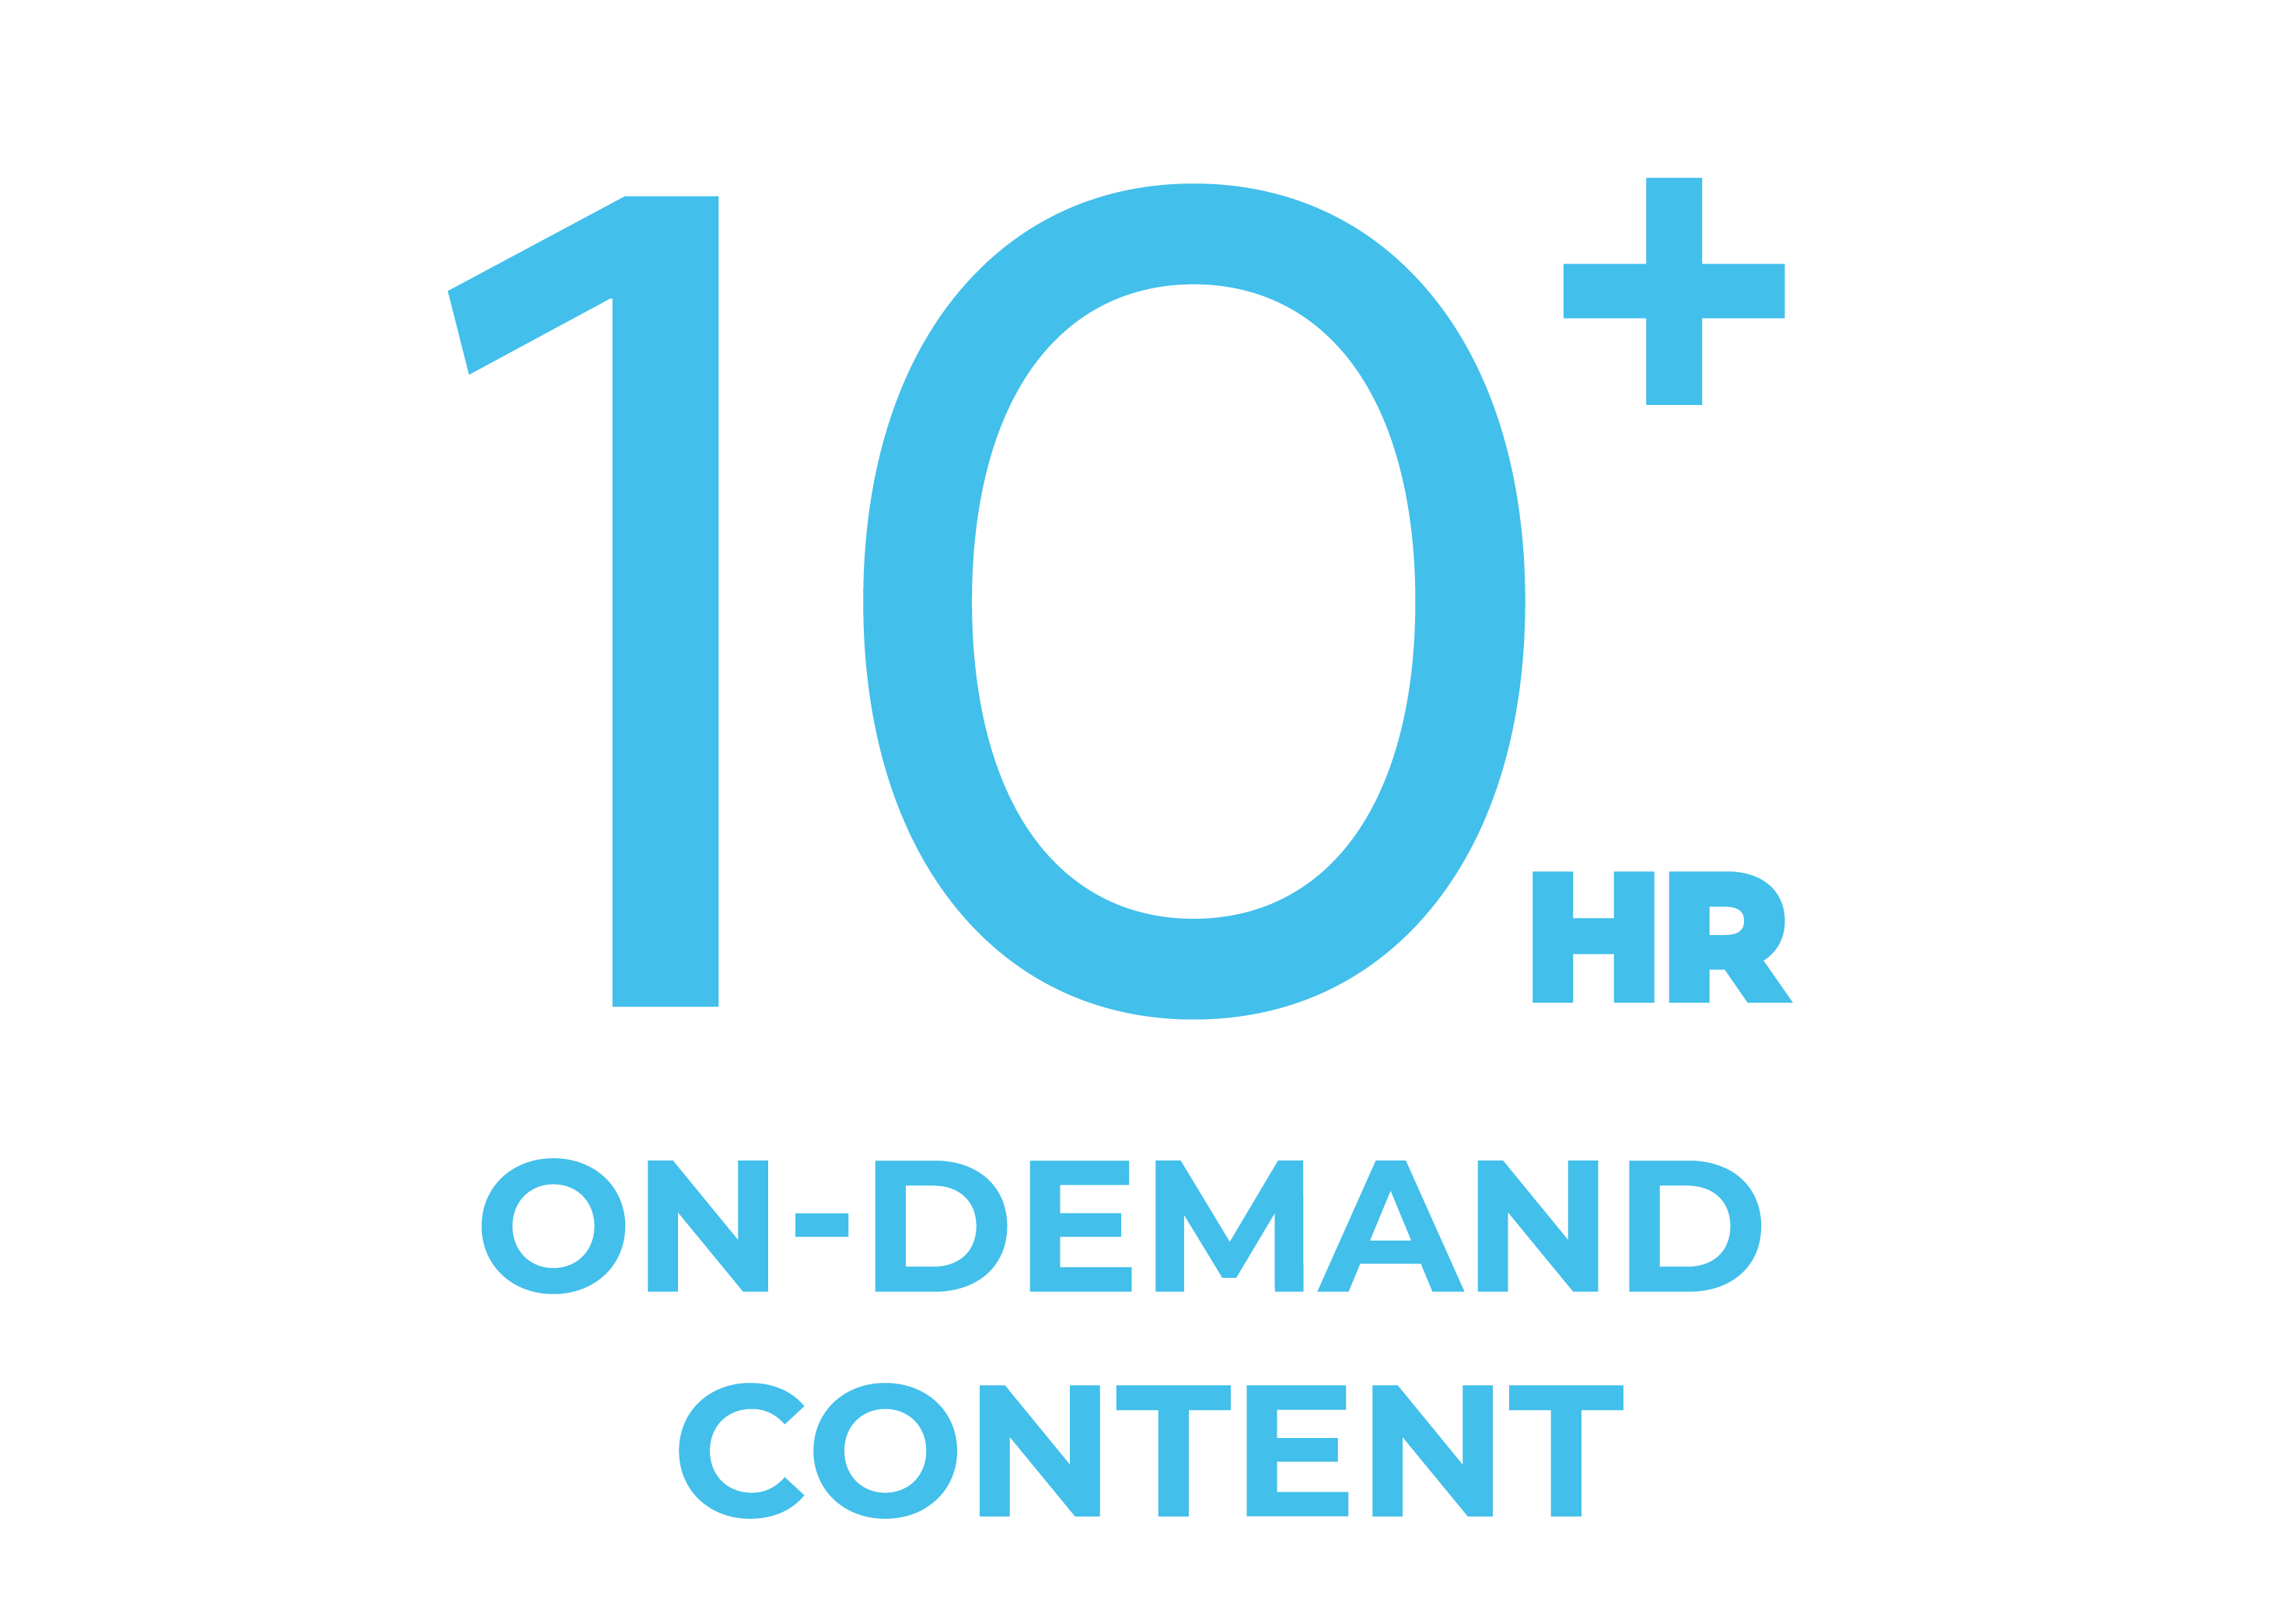 8 HOURS ON-DEMAND CONTENT